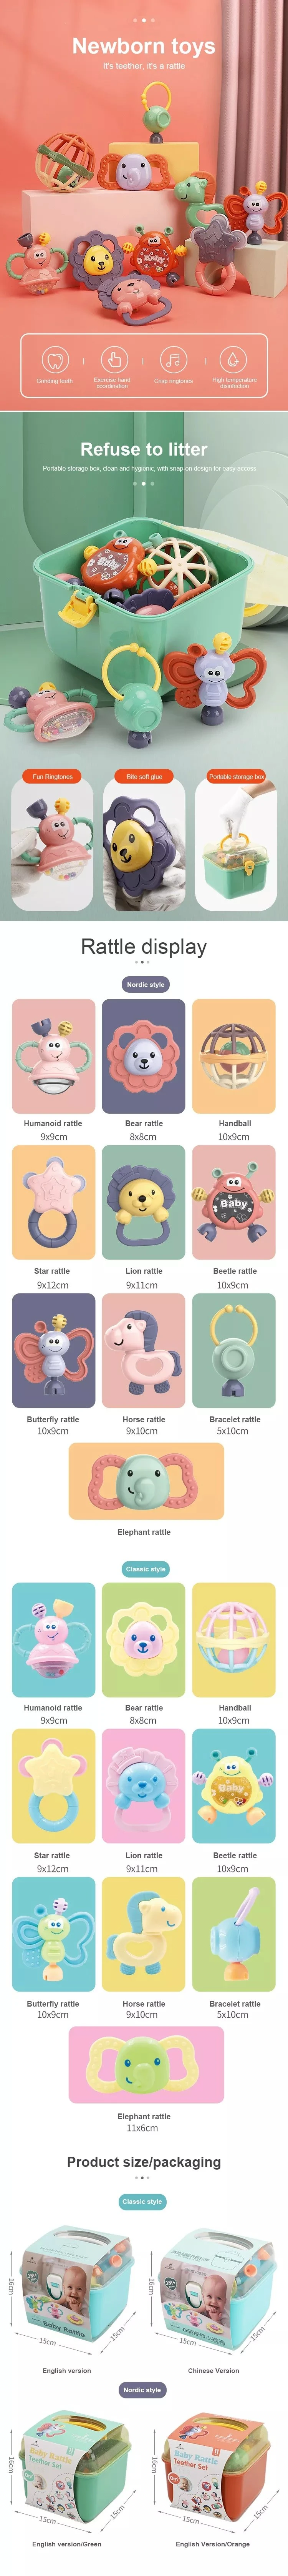 Newborn Teething Toy Shape of Animals Handbell Baby Biting Toy Gifts Cute Teething Toy